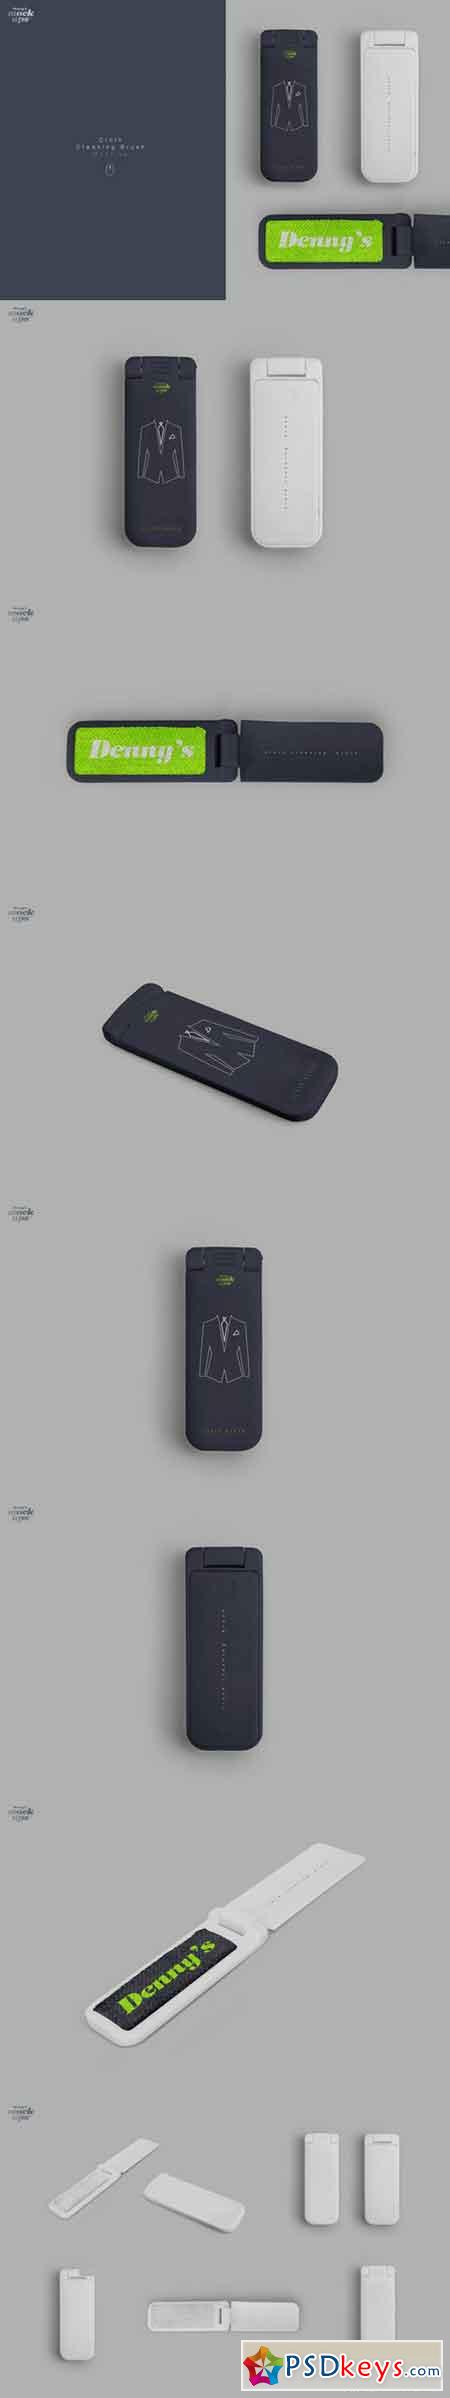 Cloth Cleaning Brush Mockup 795032